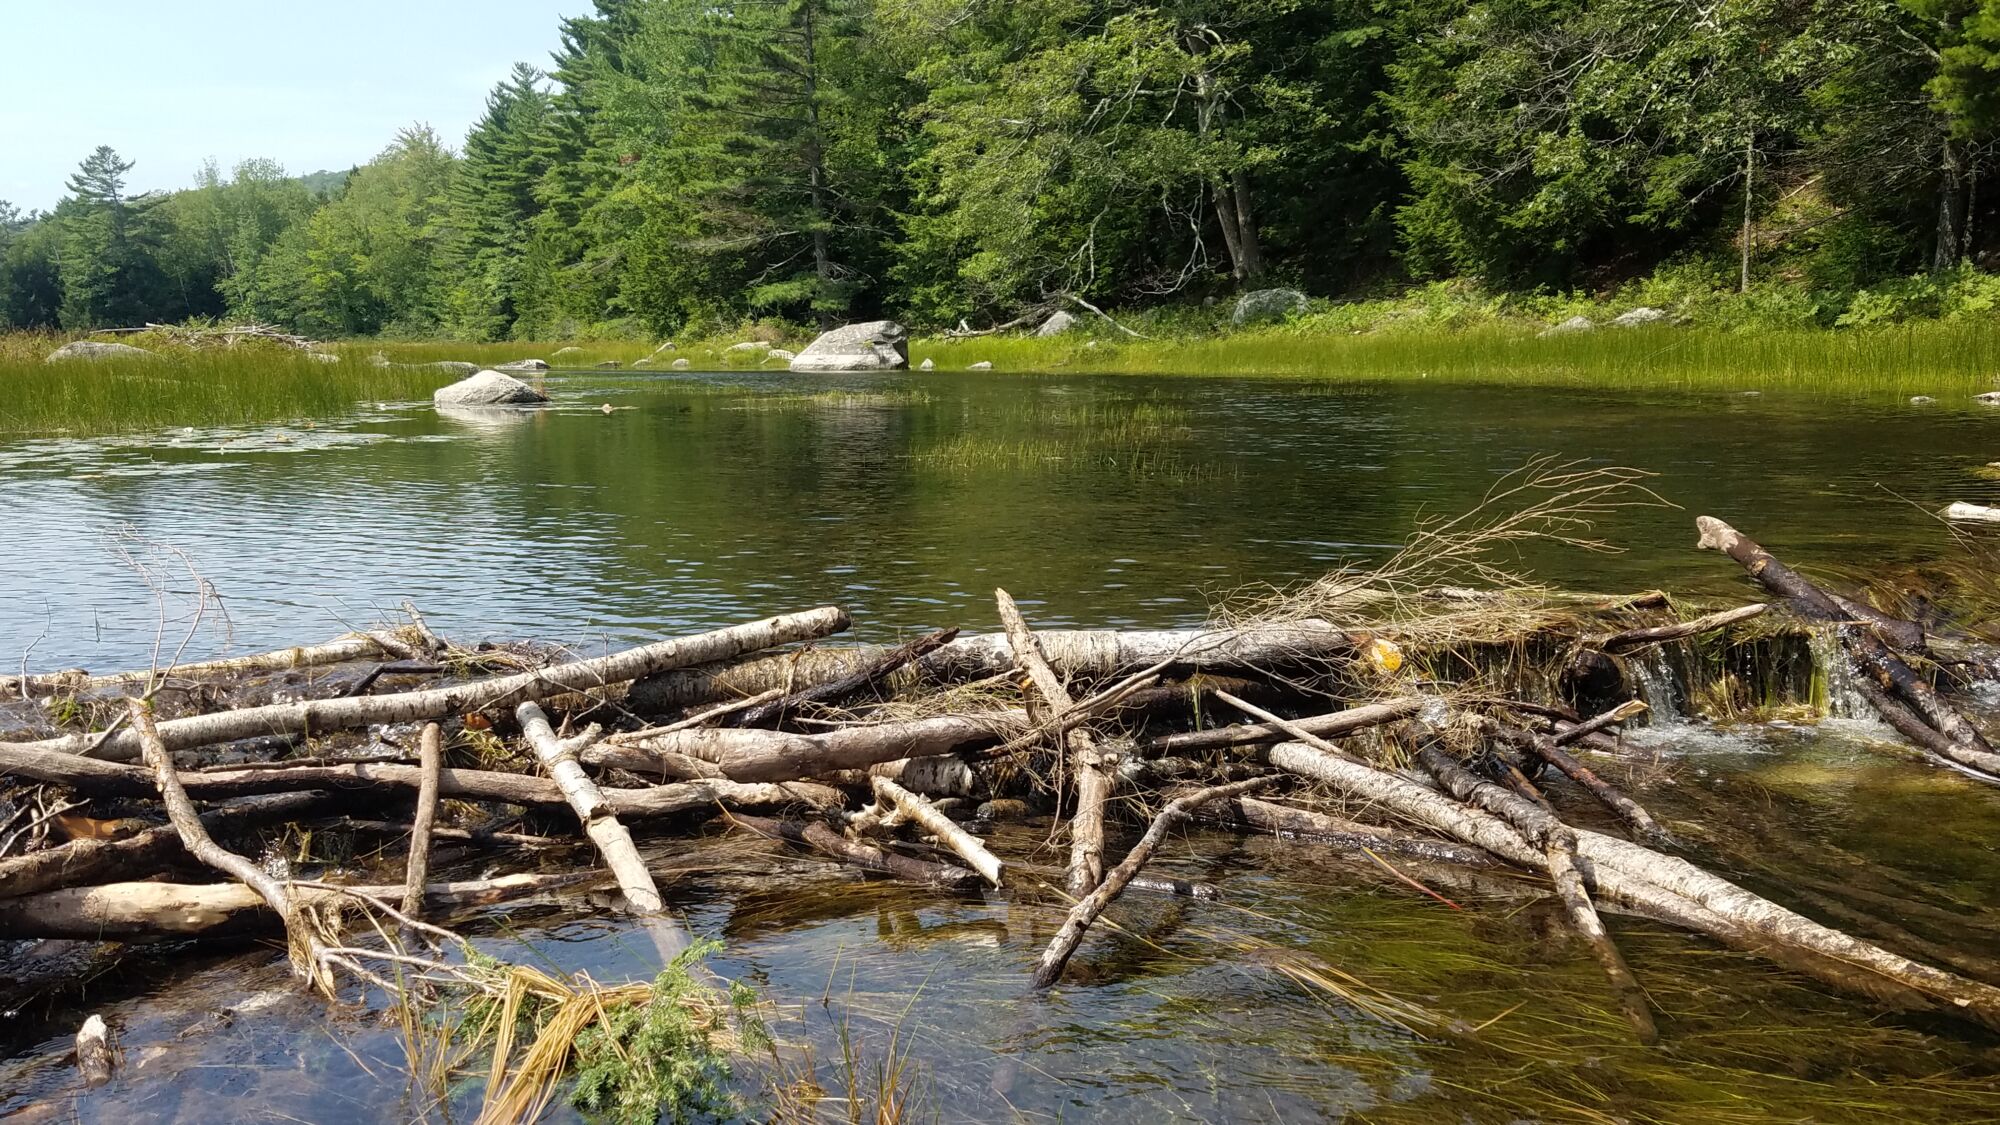 A photo of the early stages of a beaver dam being built in the water.